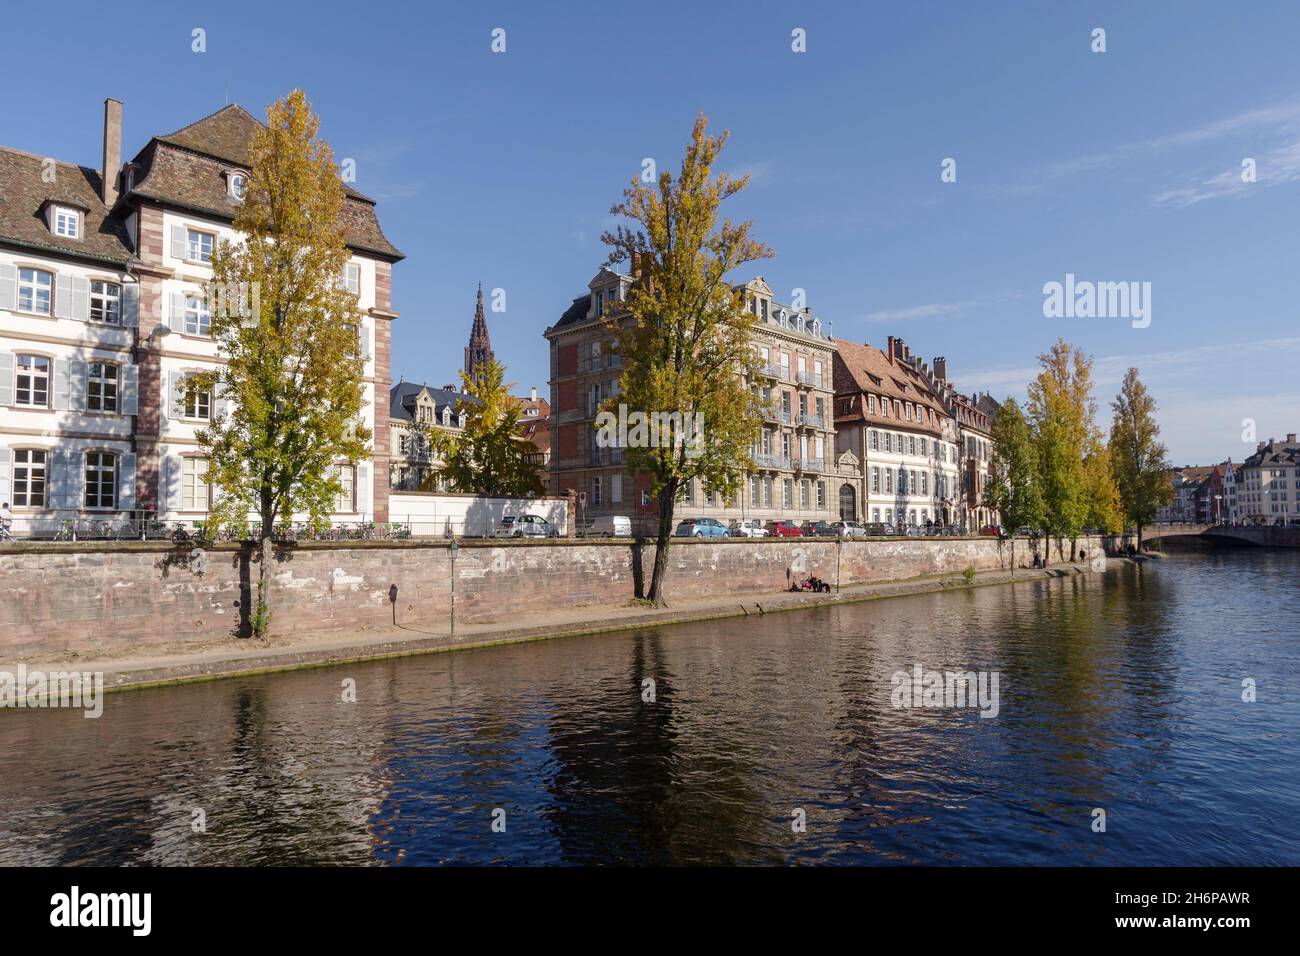 France, Strasbourg, Ill River canal with promenade and row of ...